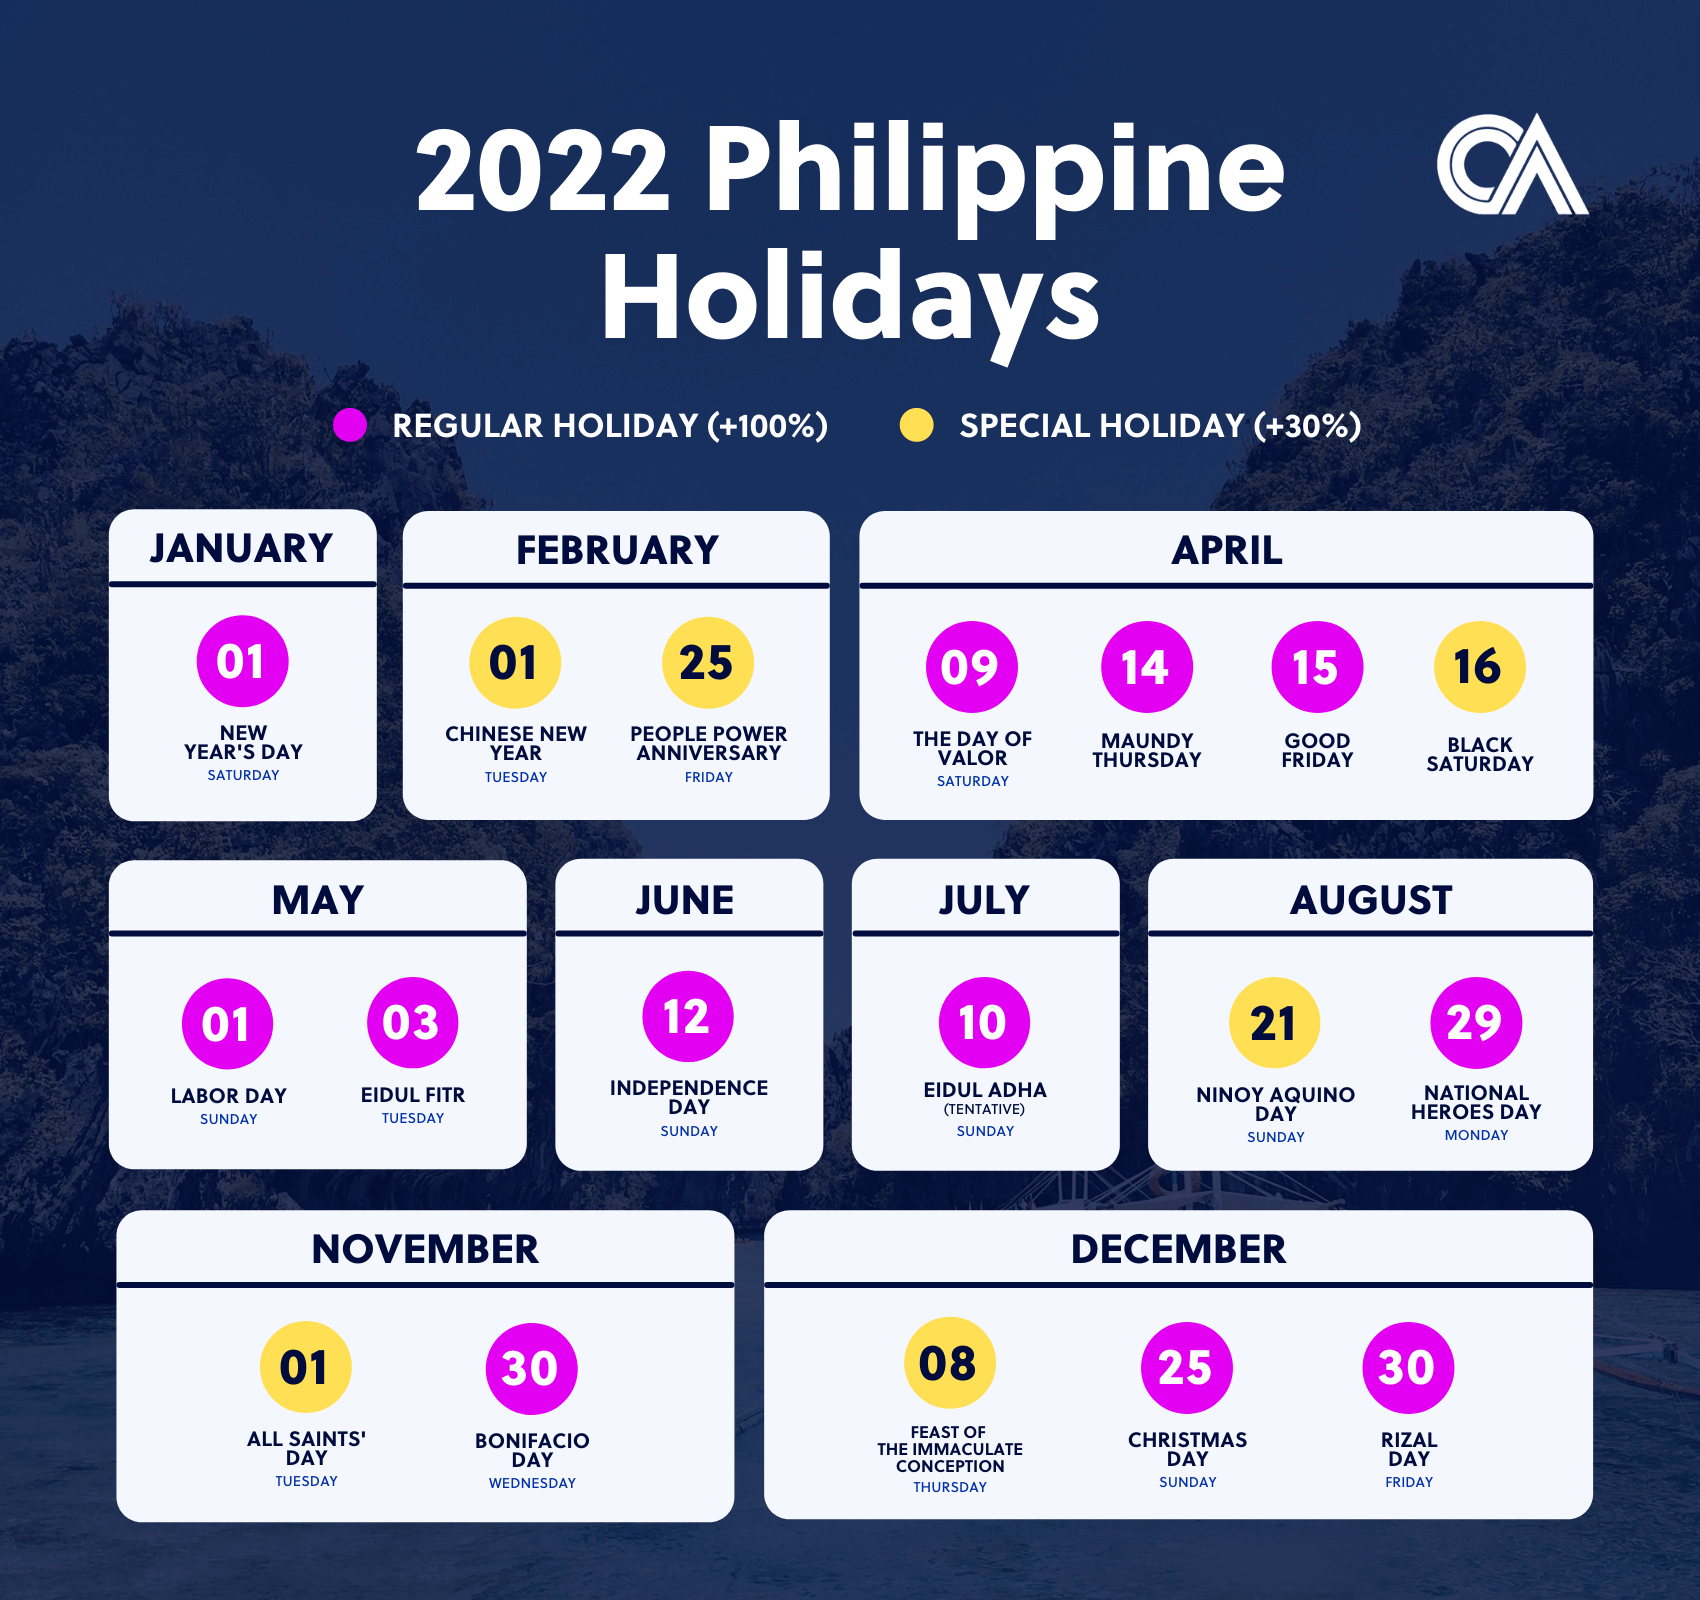 Holiday 2022 Calendar Philippine Holidays 2022 | Outsource Accelerator